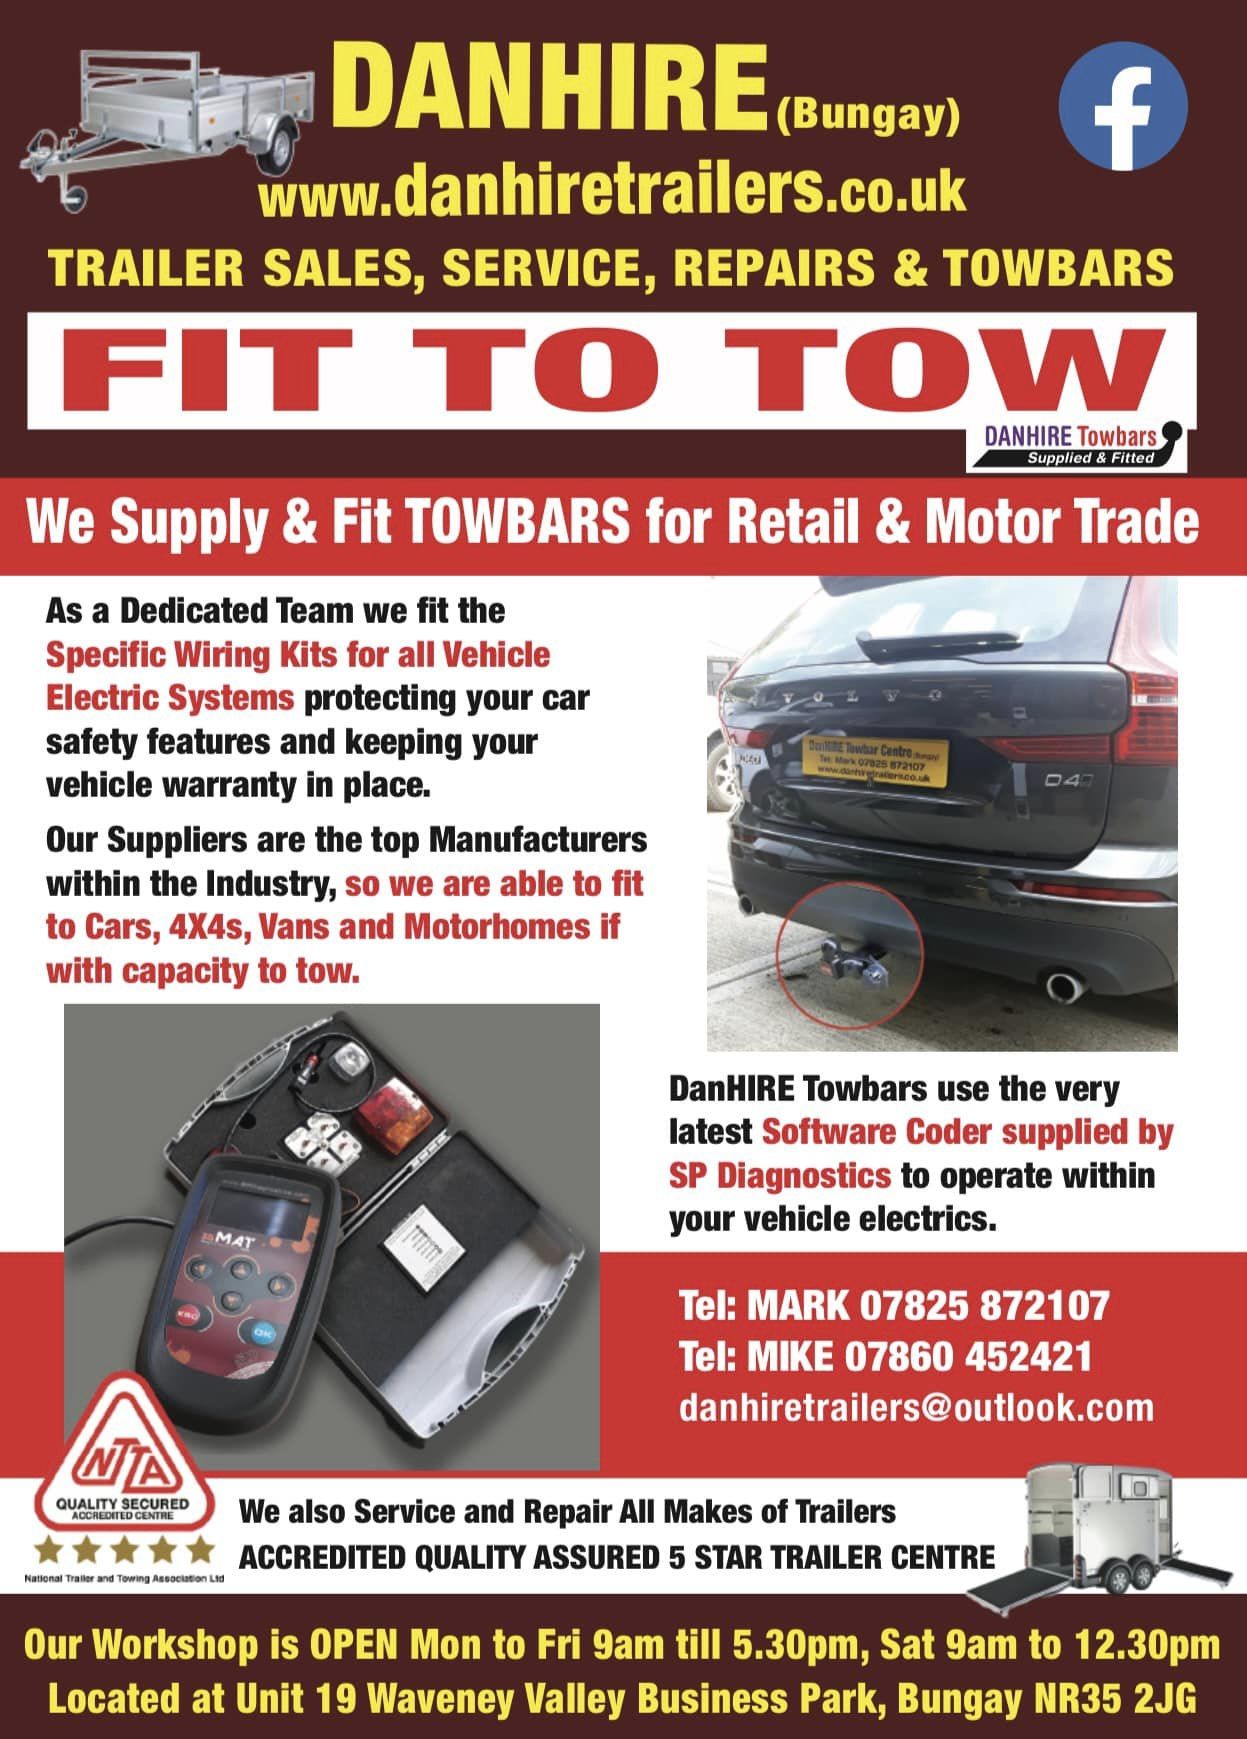 FIT TO TOW new flyers produced for DANHIRE Trailers by imajaz limited.